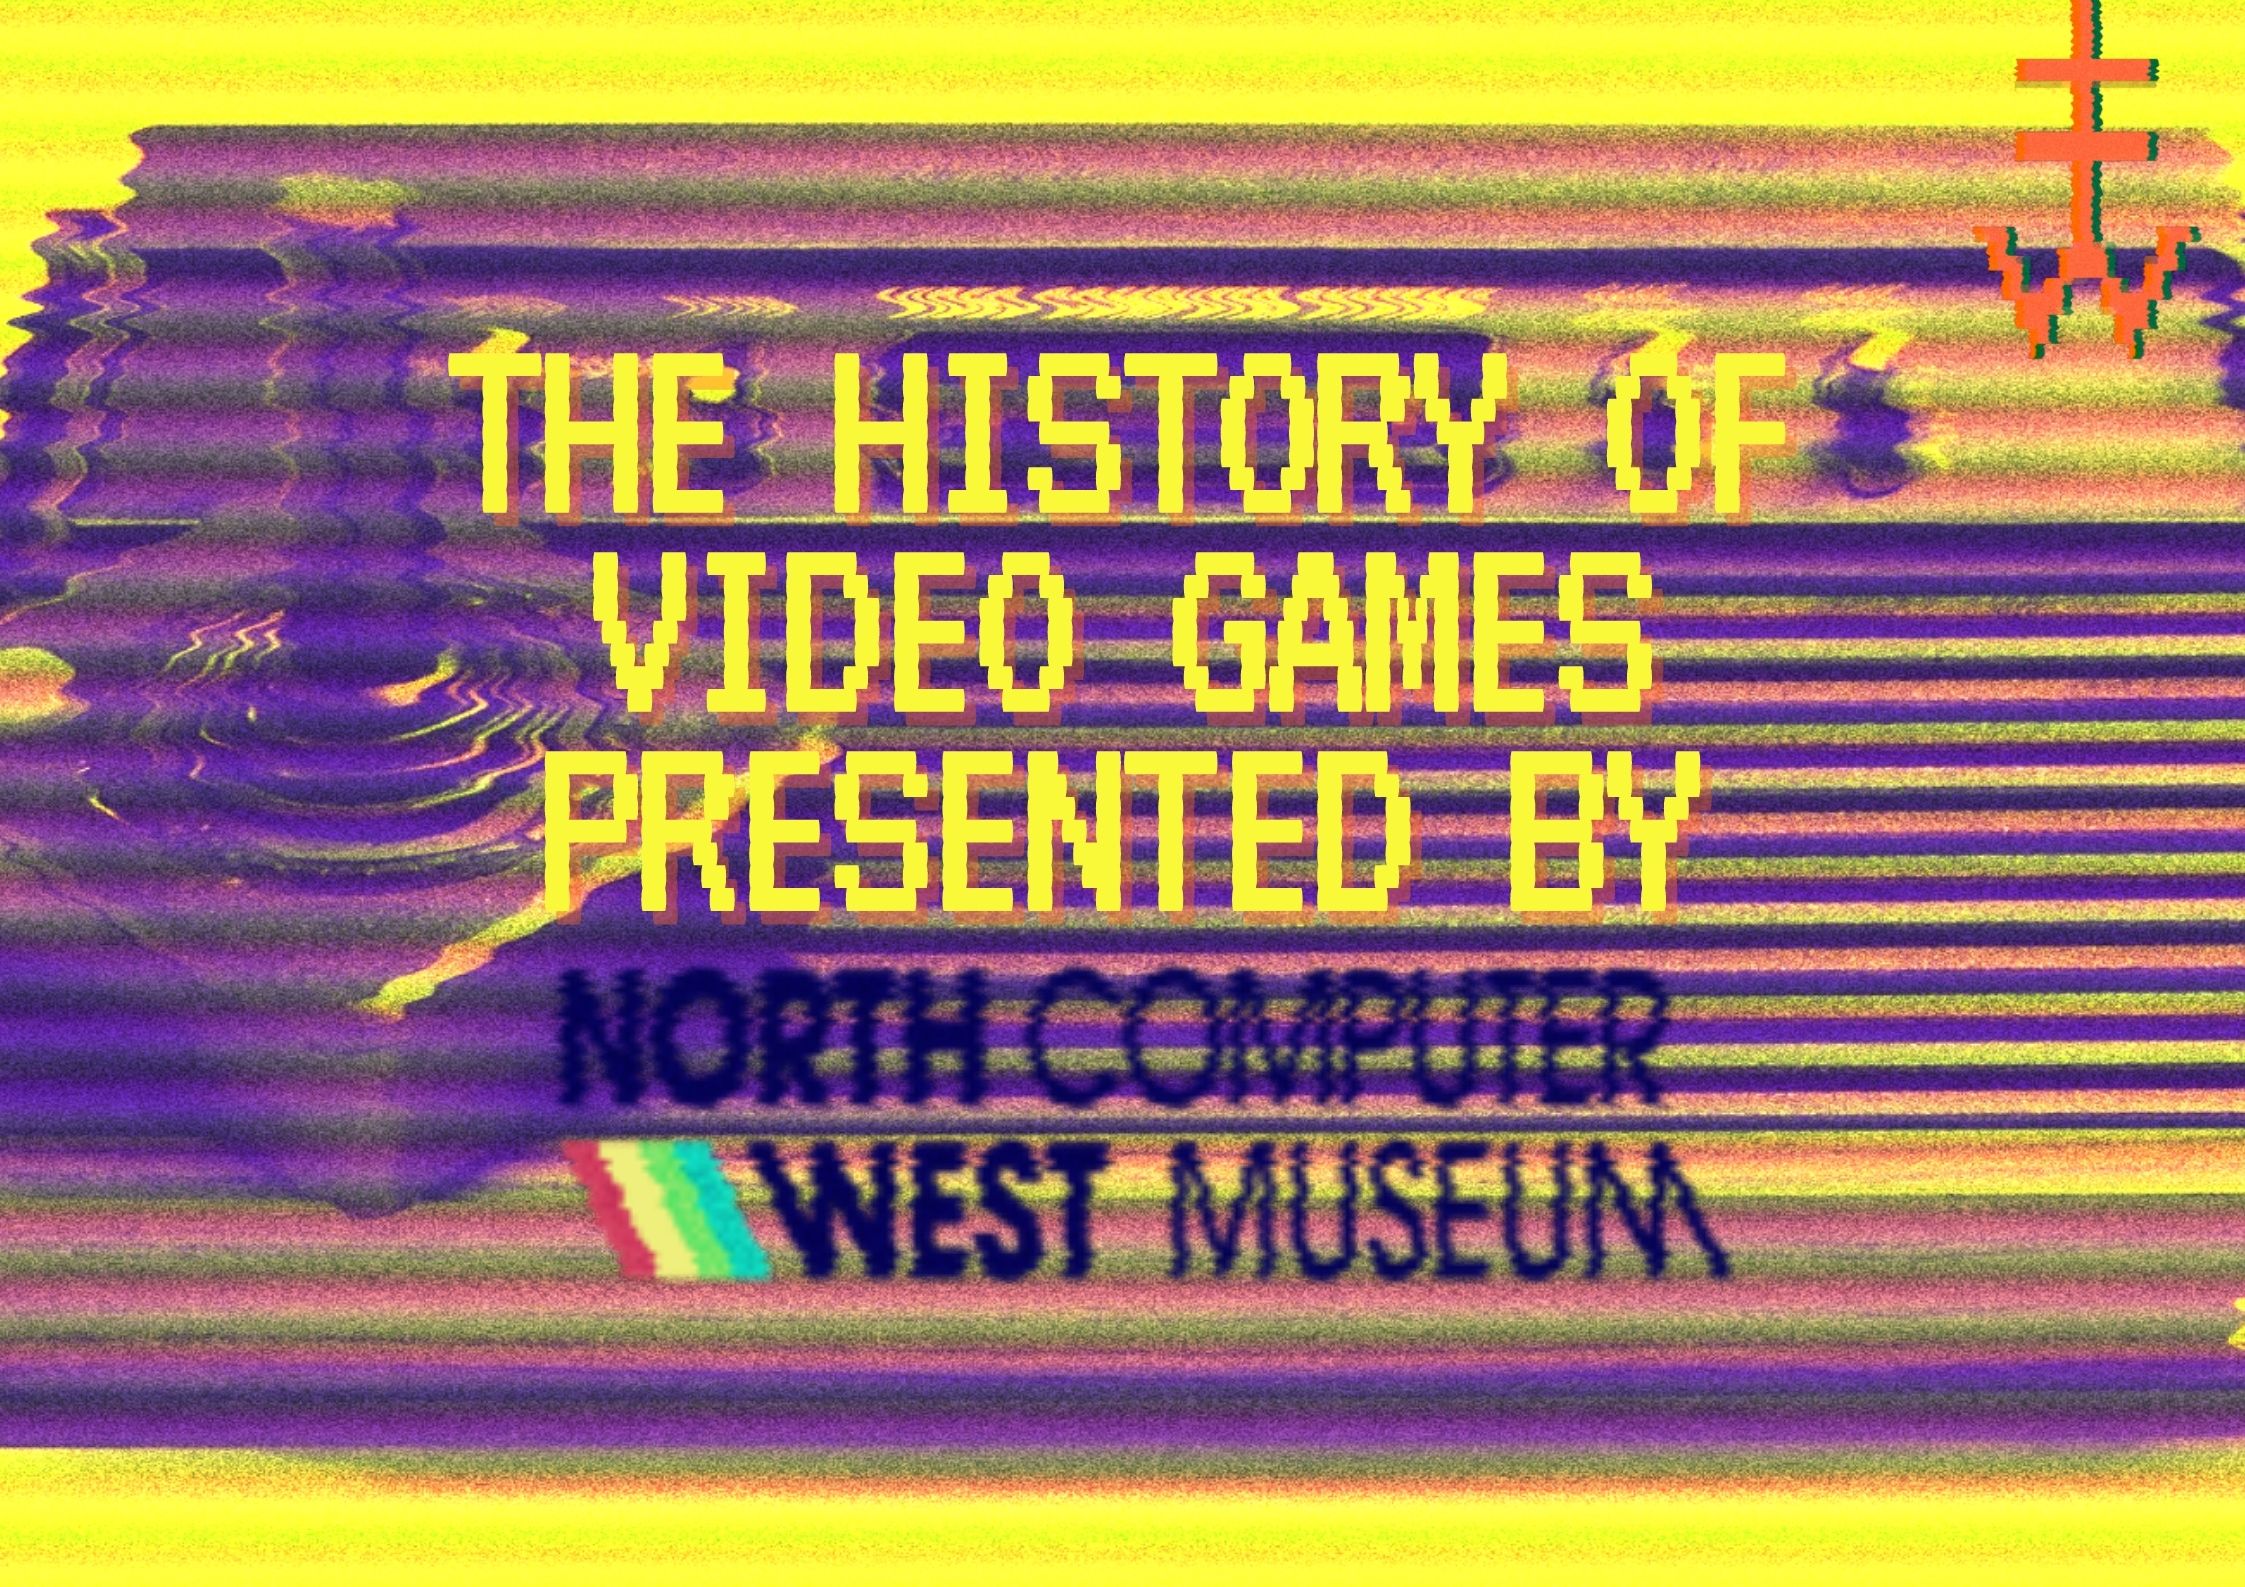 The History of Videogames